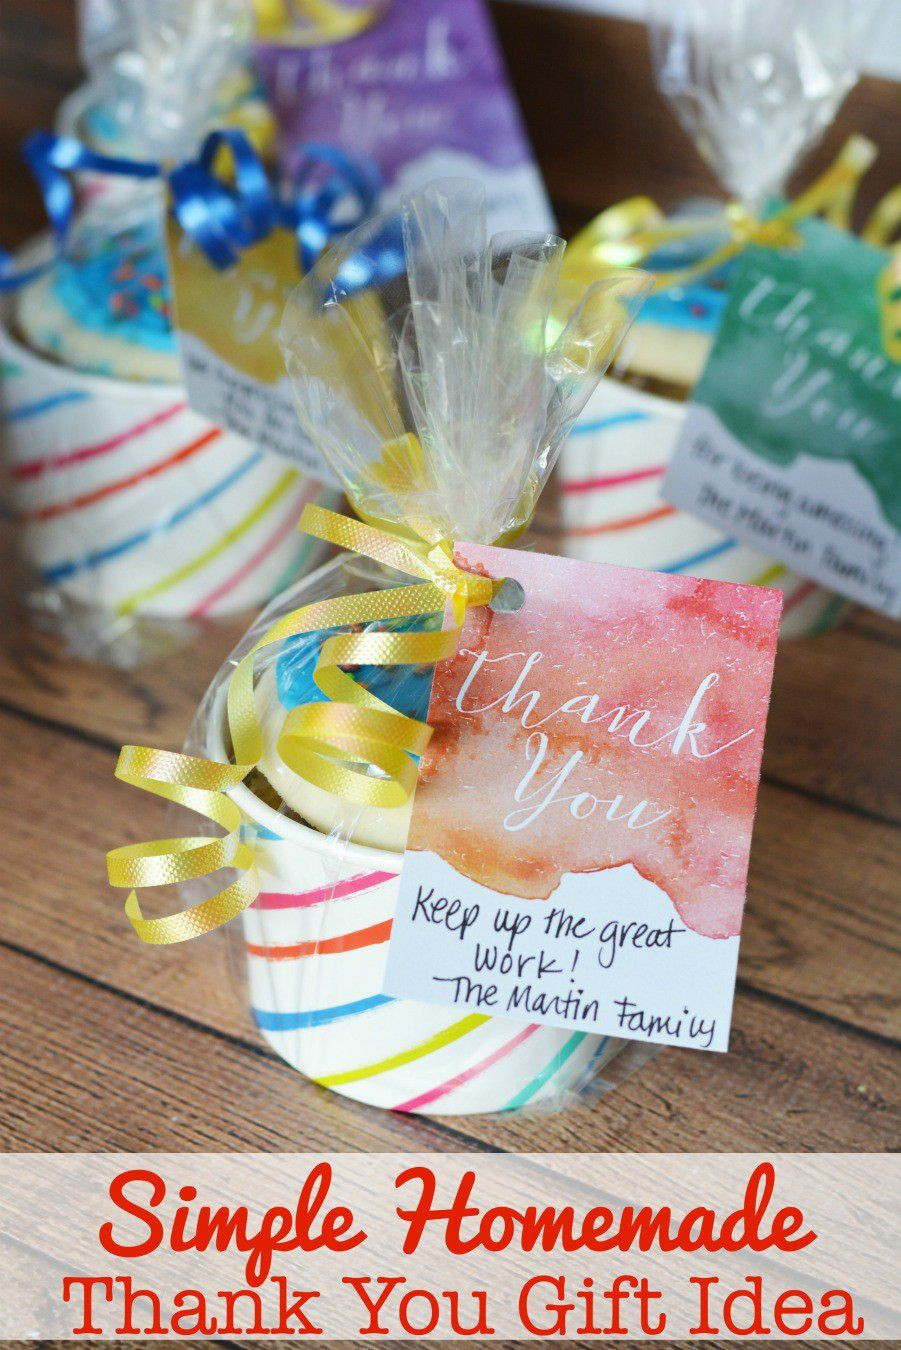 Thank You Gift Ideas For Coworkers Homemade
 Thank You Gift Ideas For Coworkers